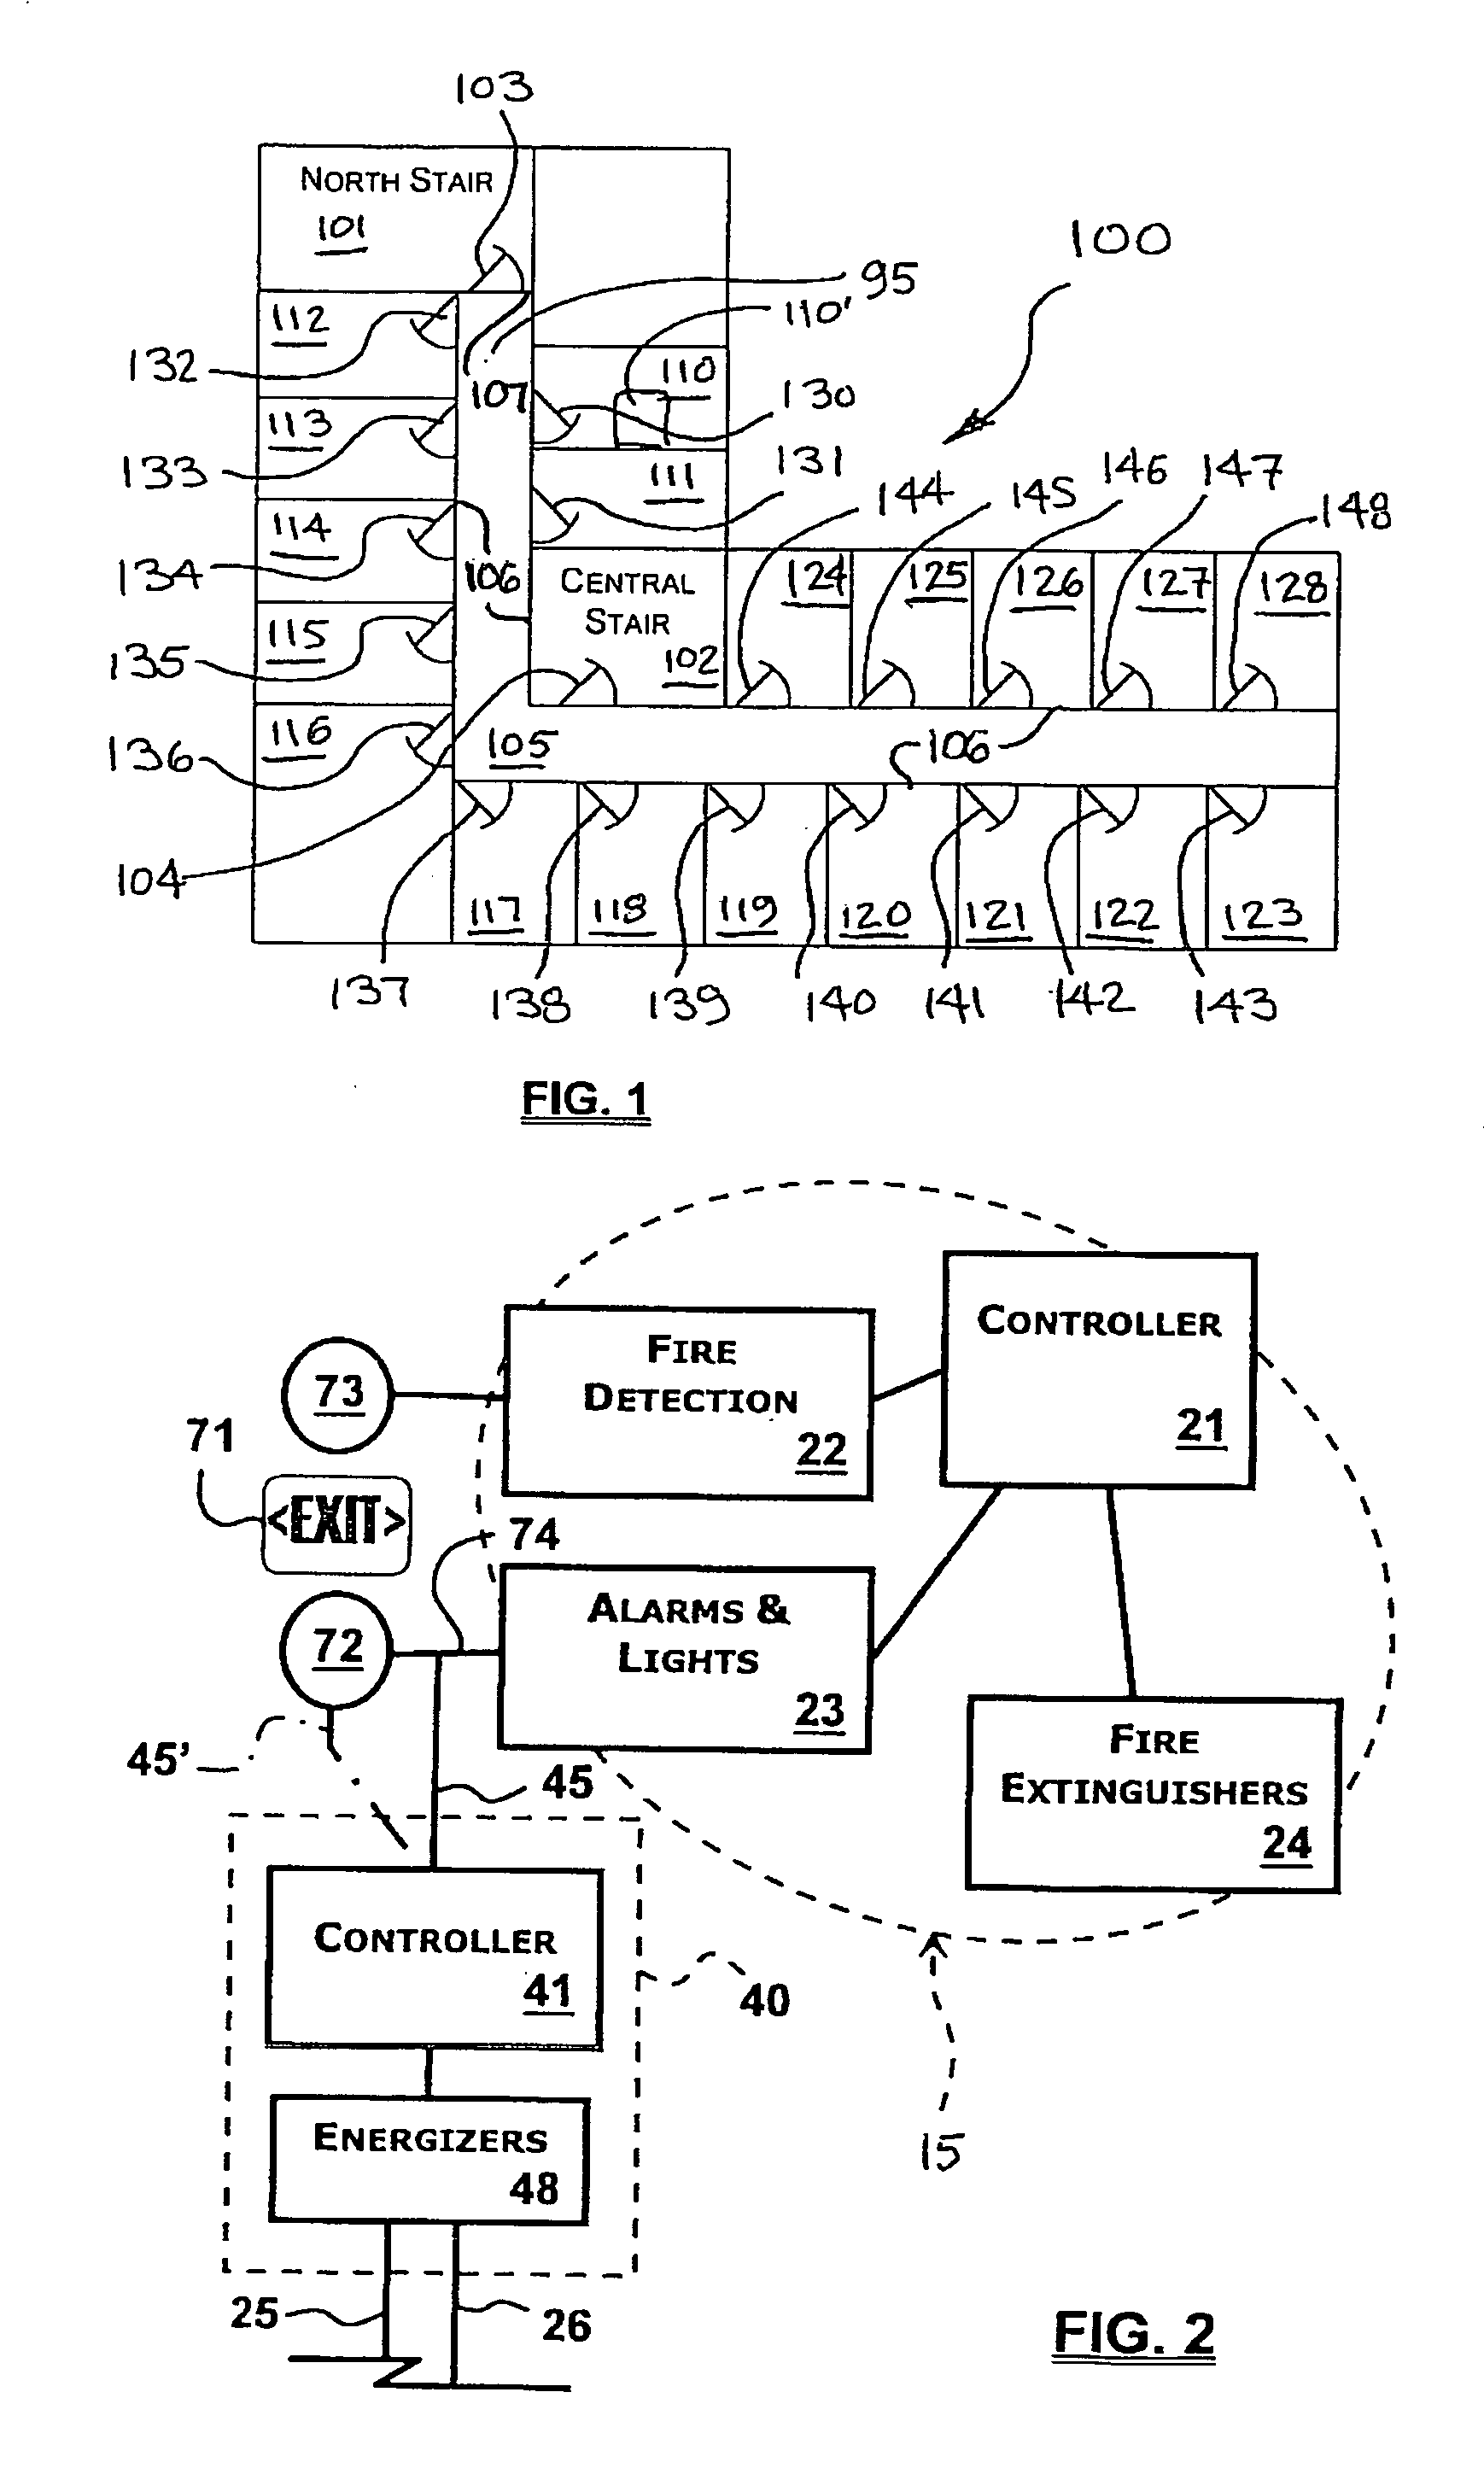 Emergency exit route illumination system and methods